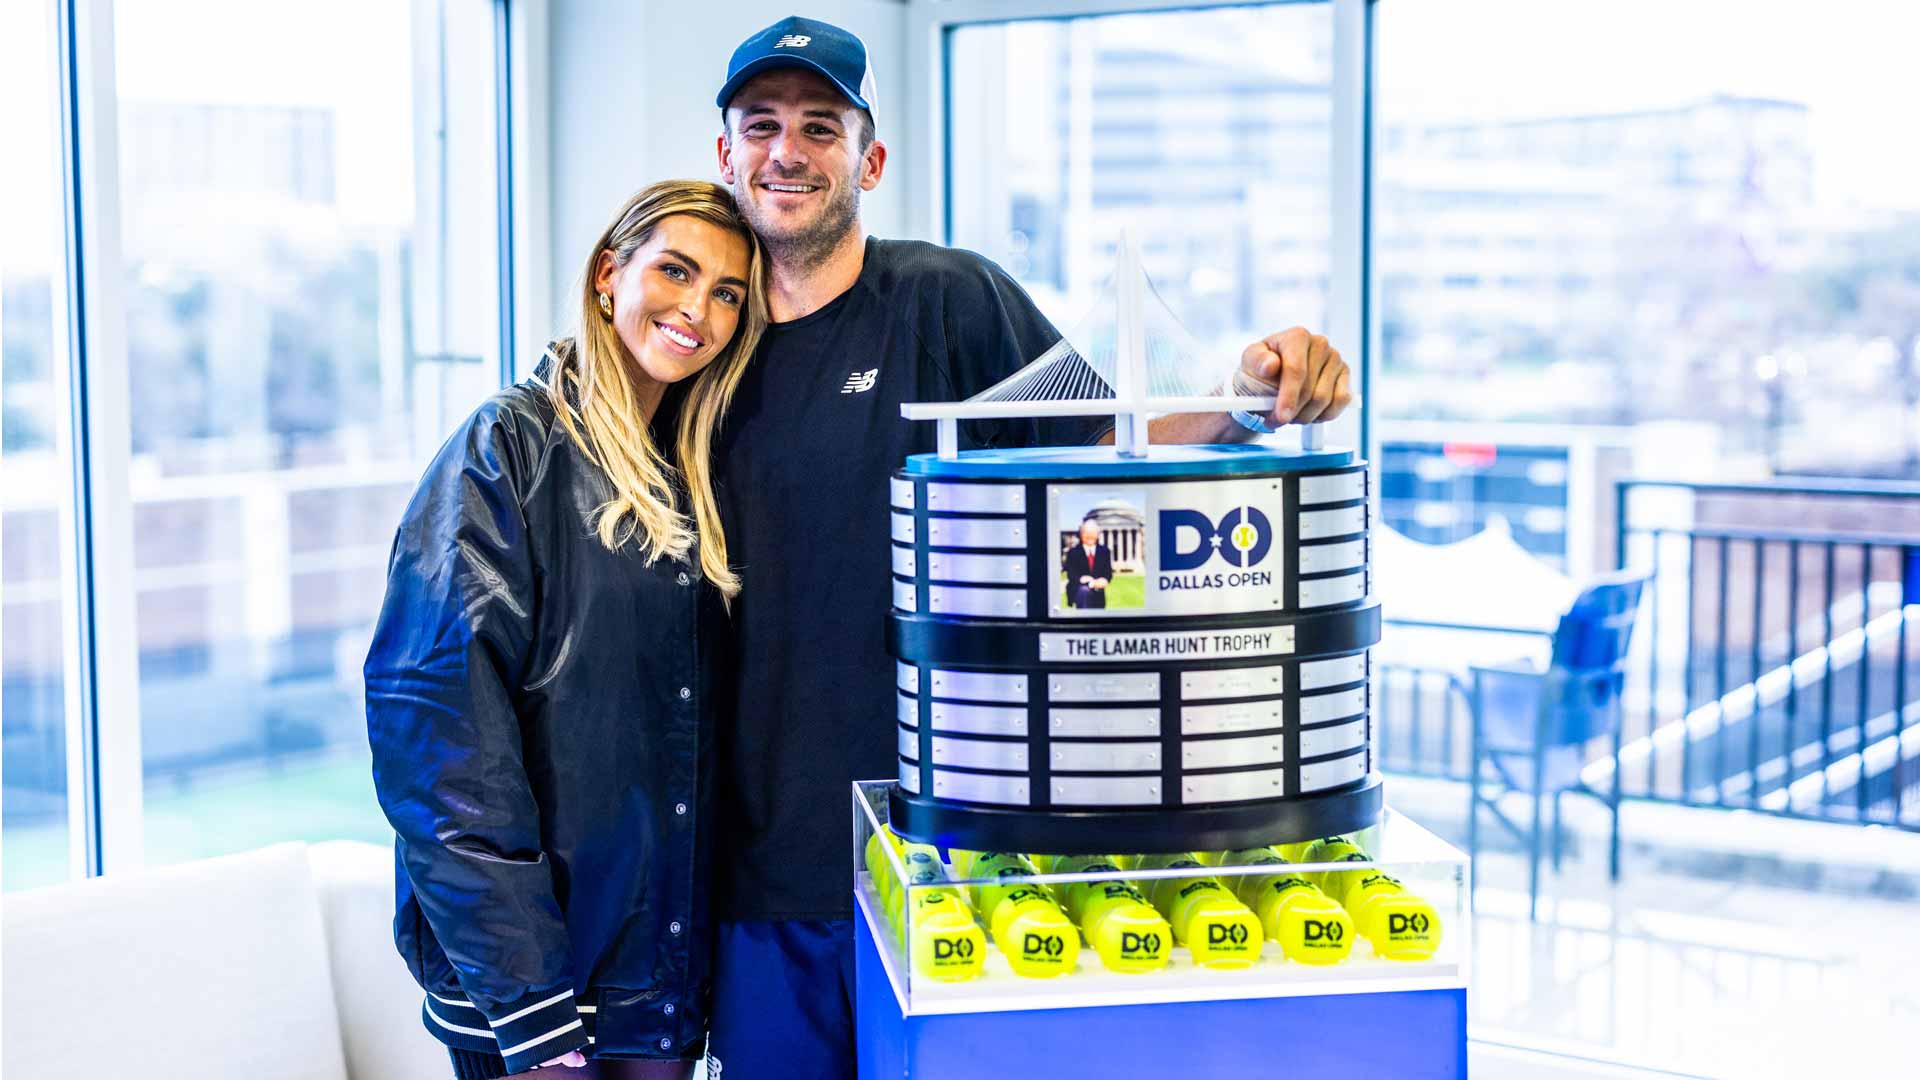 Tommy Paul celebrates his Dallas Open victory with girlfriend Paige Lorenze.